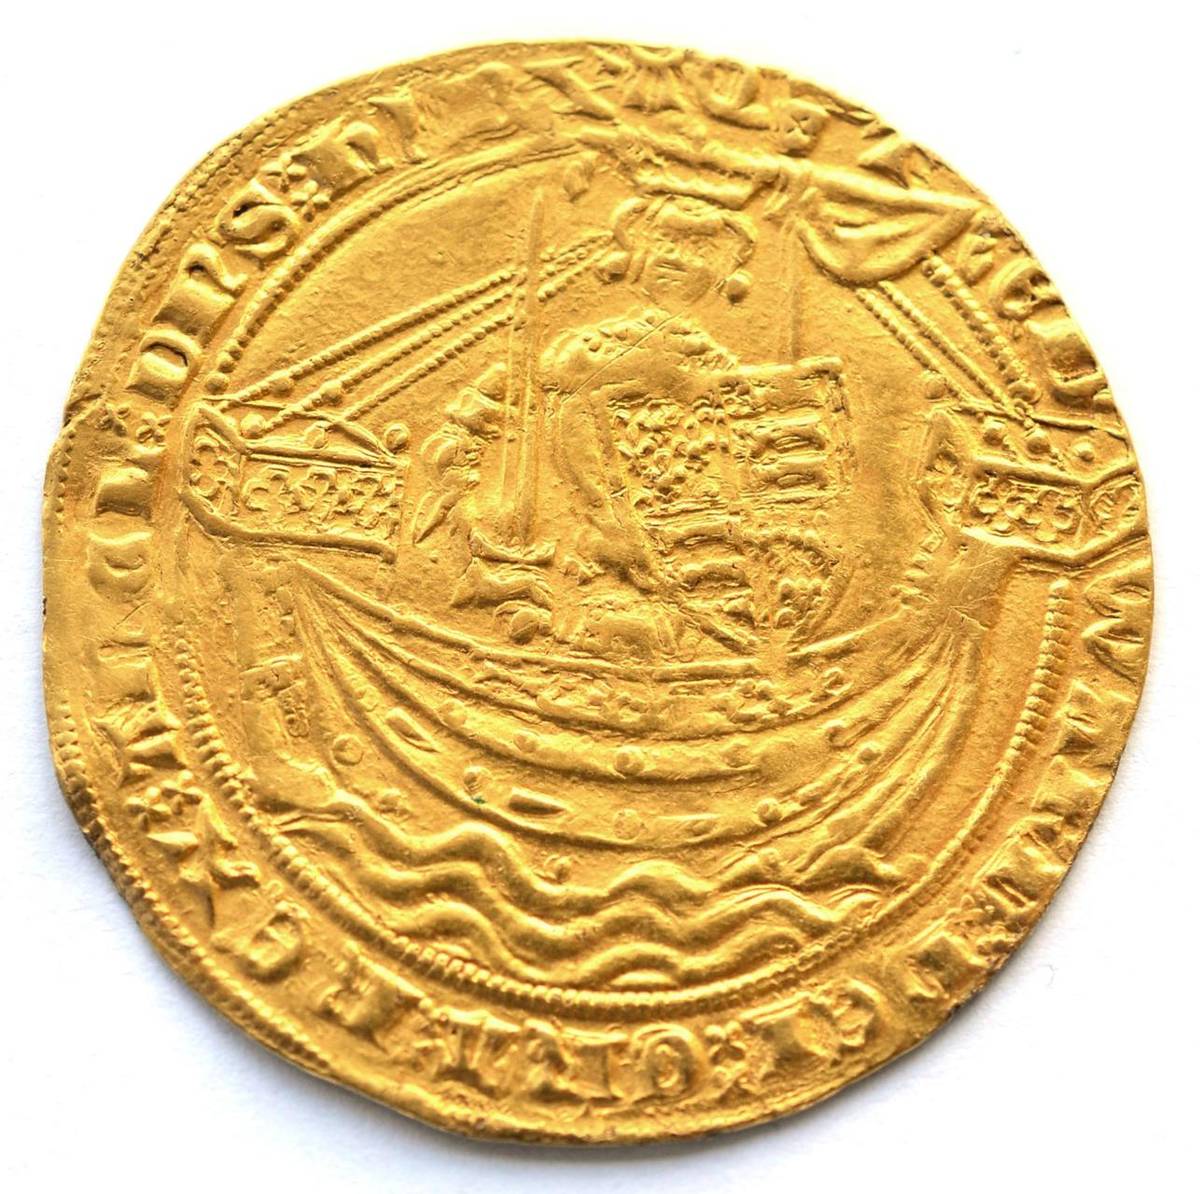 Lot 2 - Edward III Gold Noble, fourth coinage, Treaty Period (1361-69), MM cross potent; obv. EDWARD...